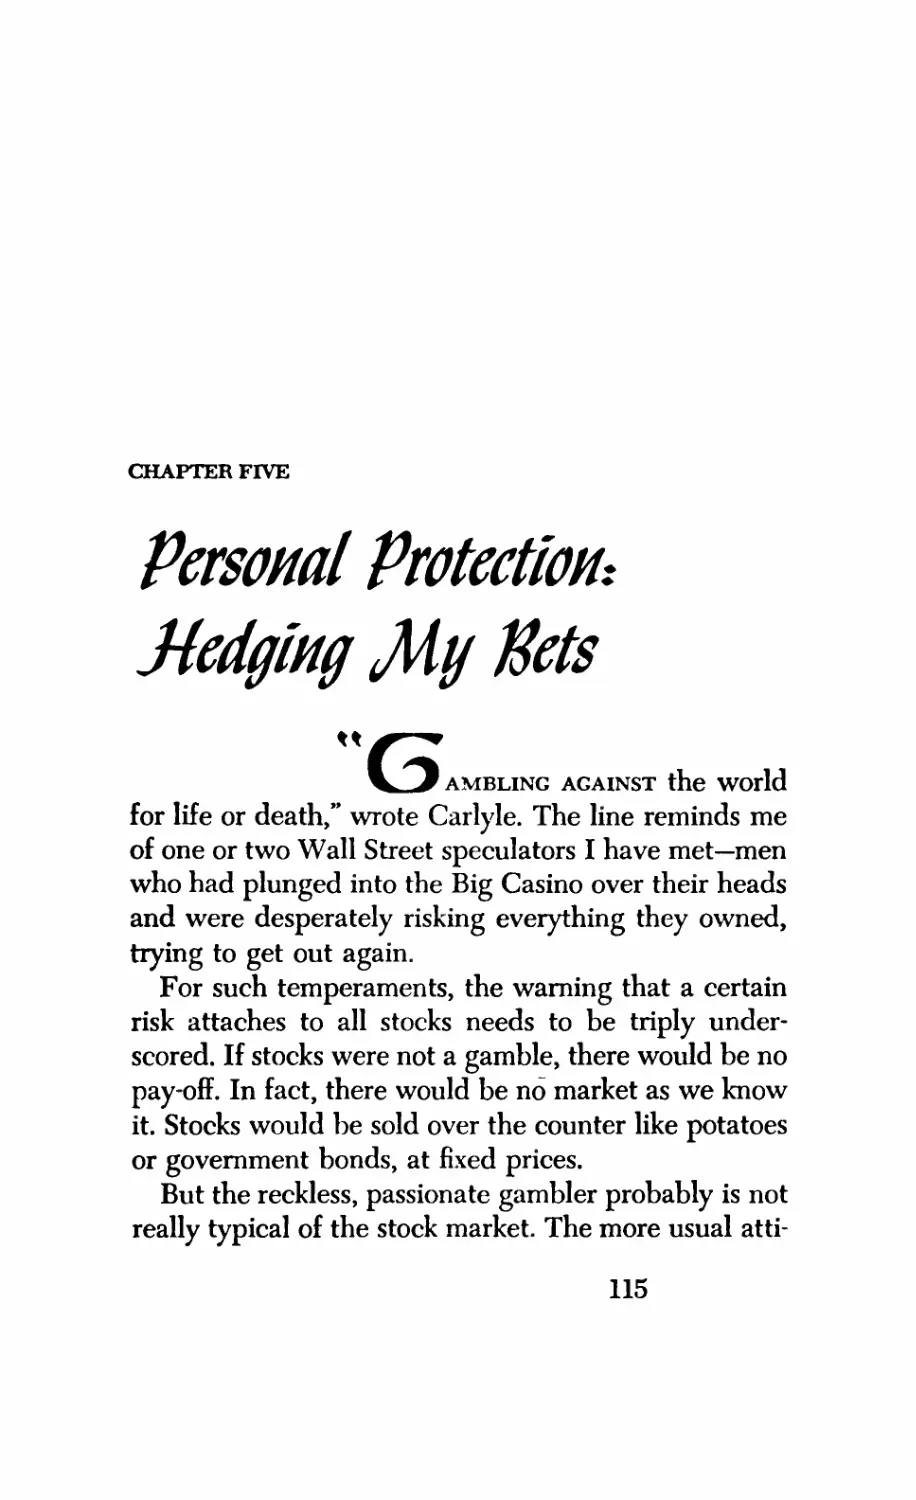 5. Personal Protection: Hedging My Bets